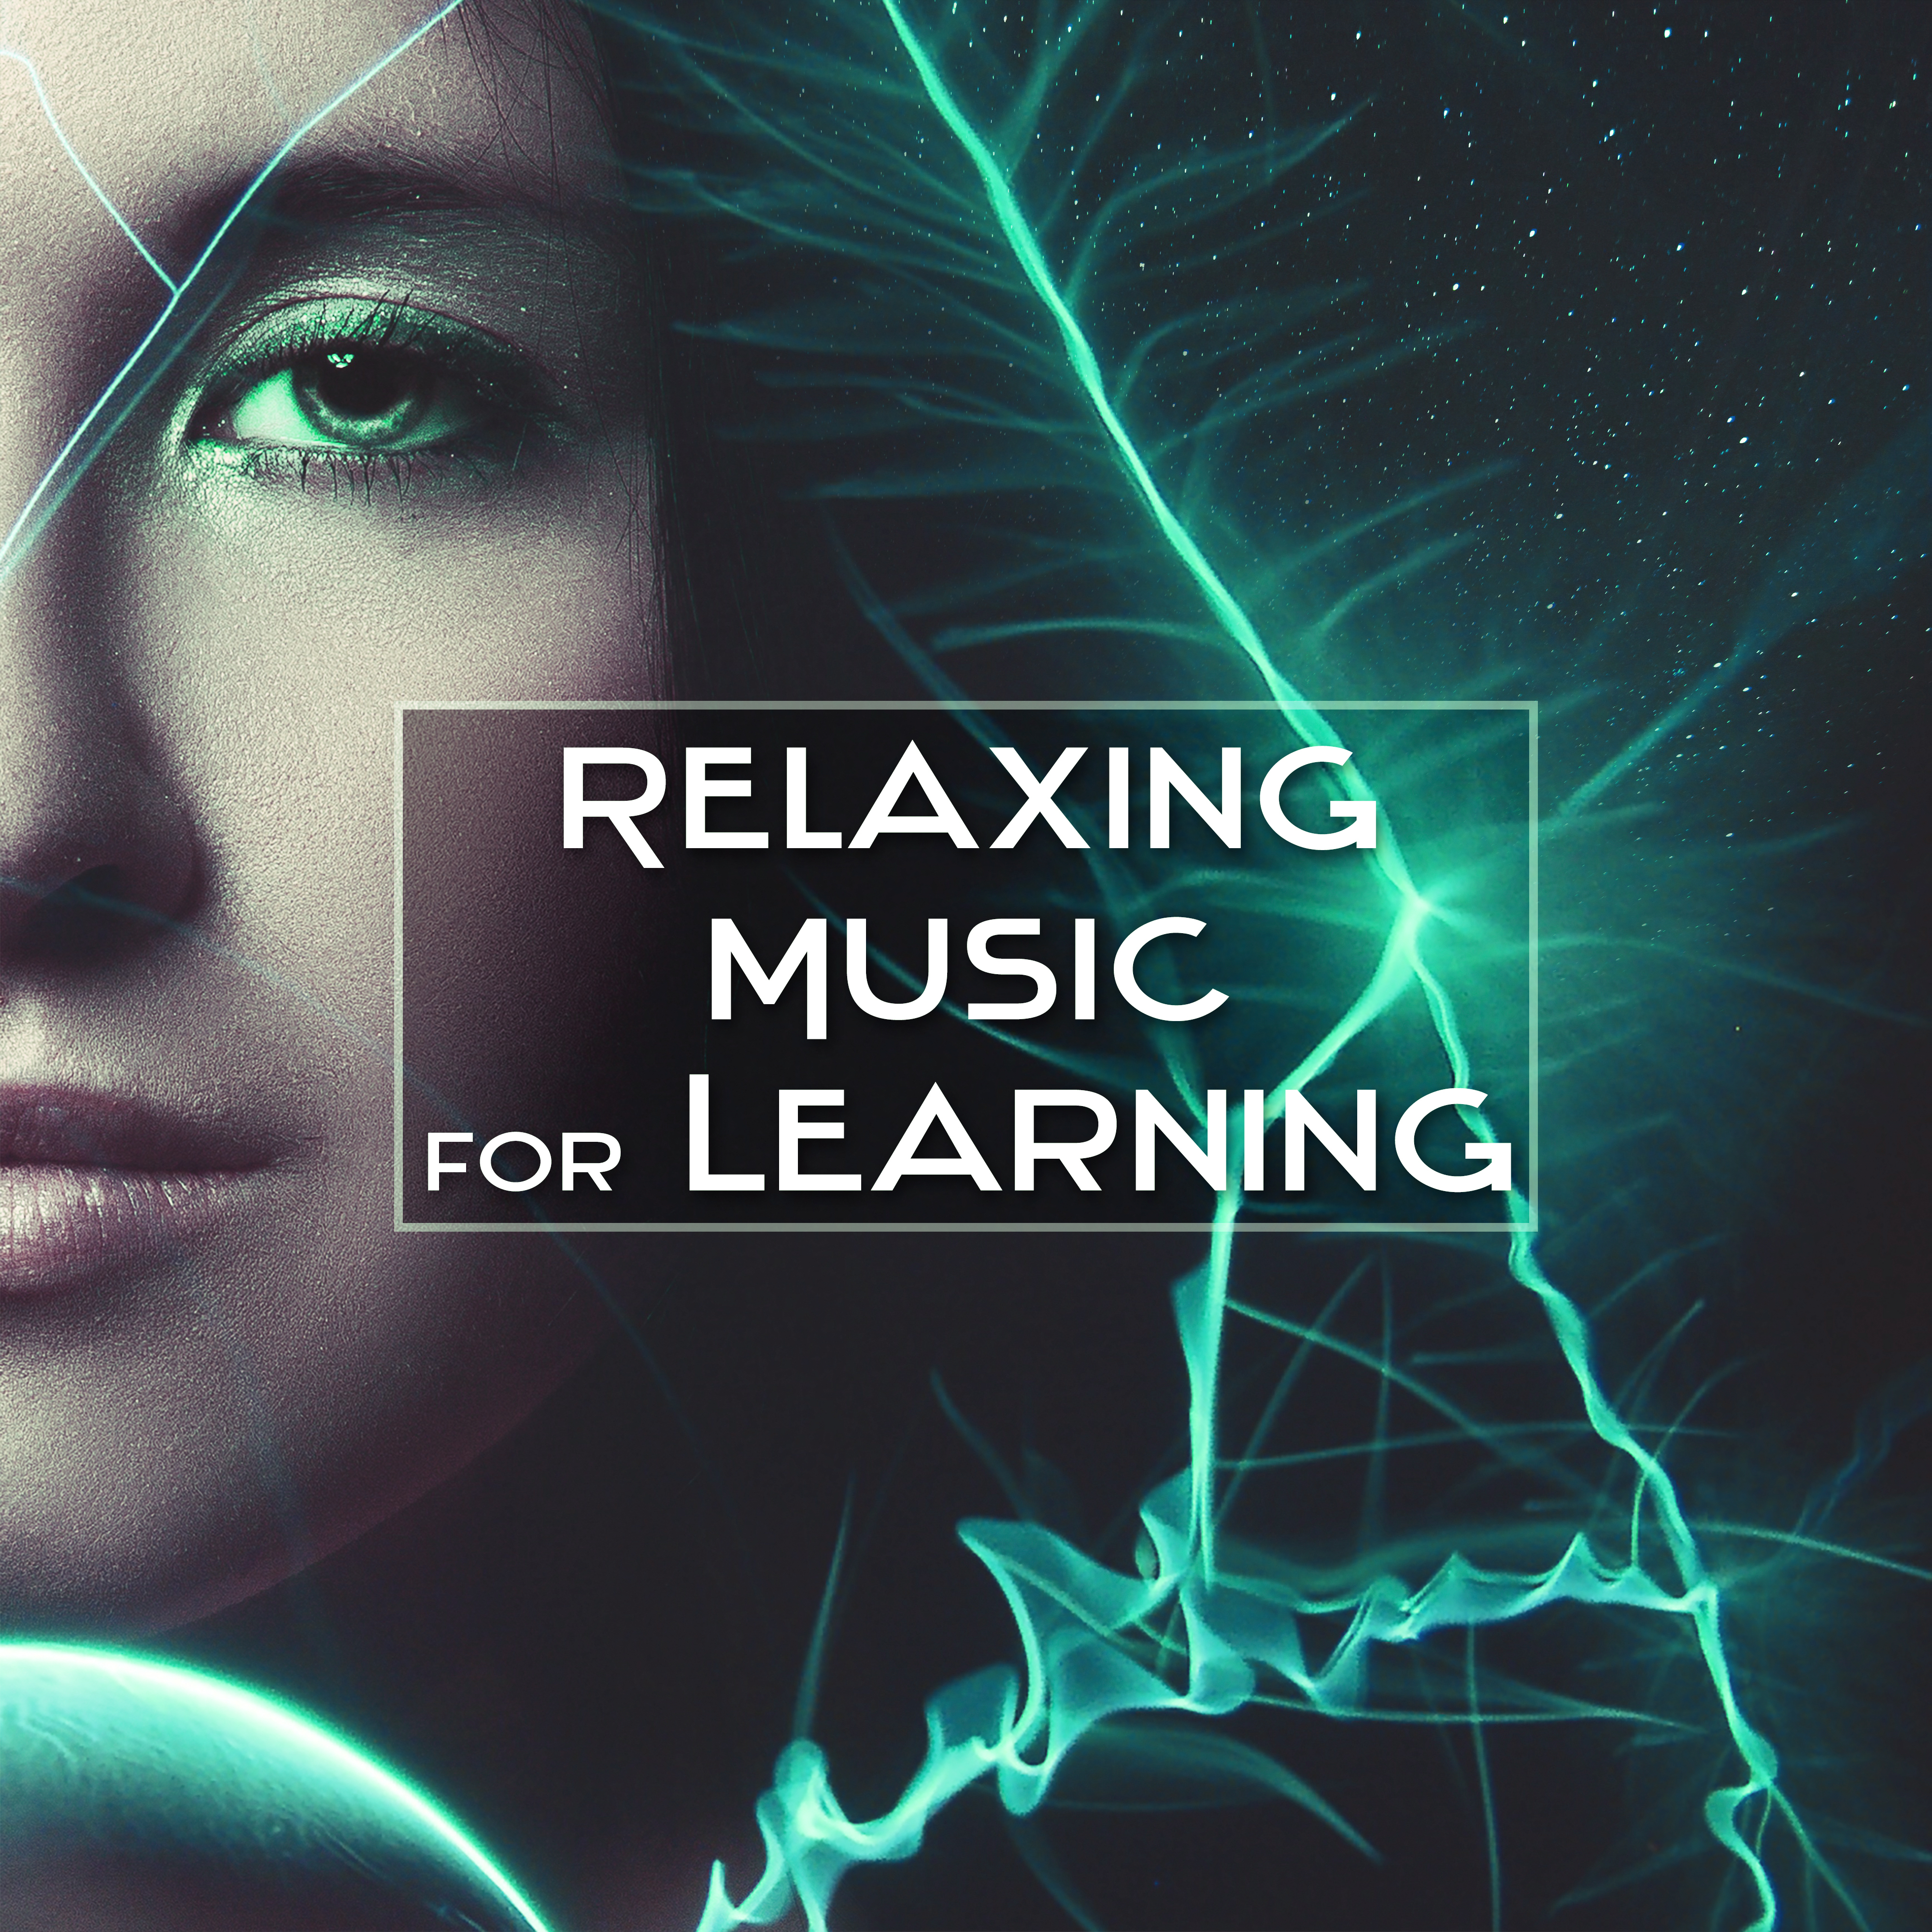 Relaxing Music for Learning  Study Music, Helpful for Keep Concentration, Calm Down Emotions and Study Faster